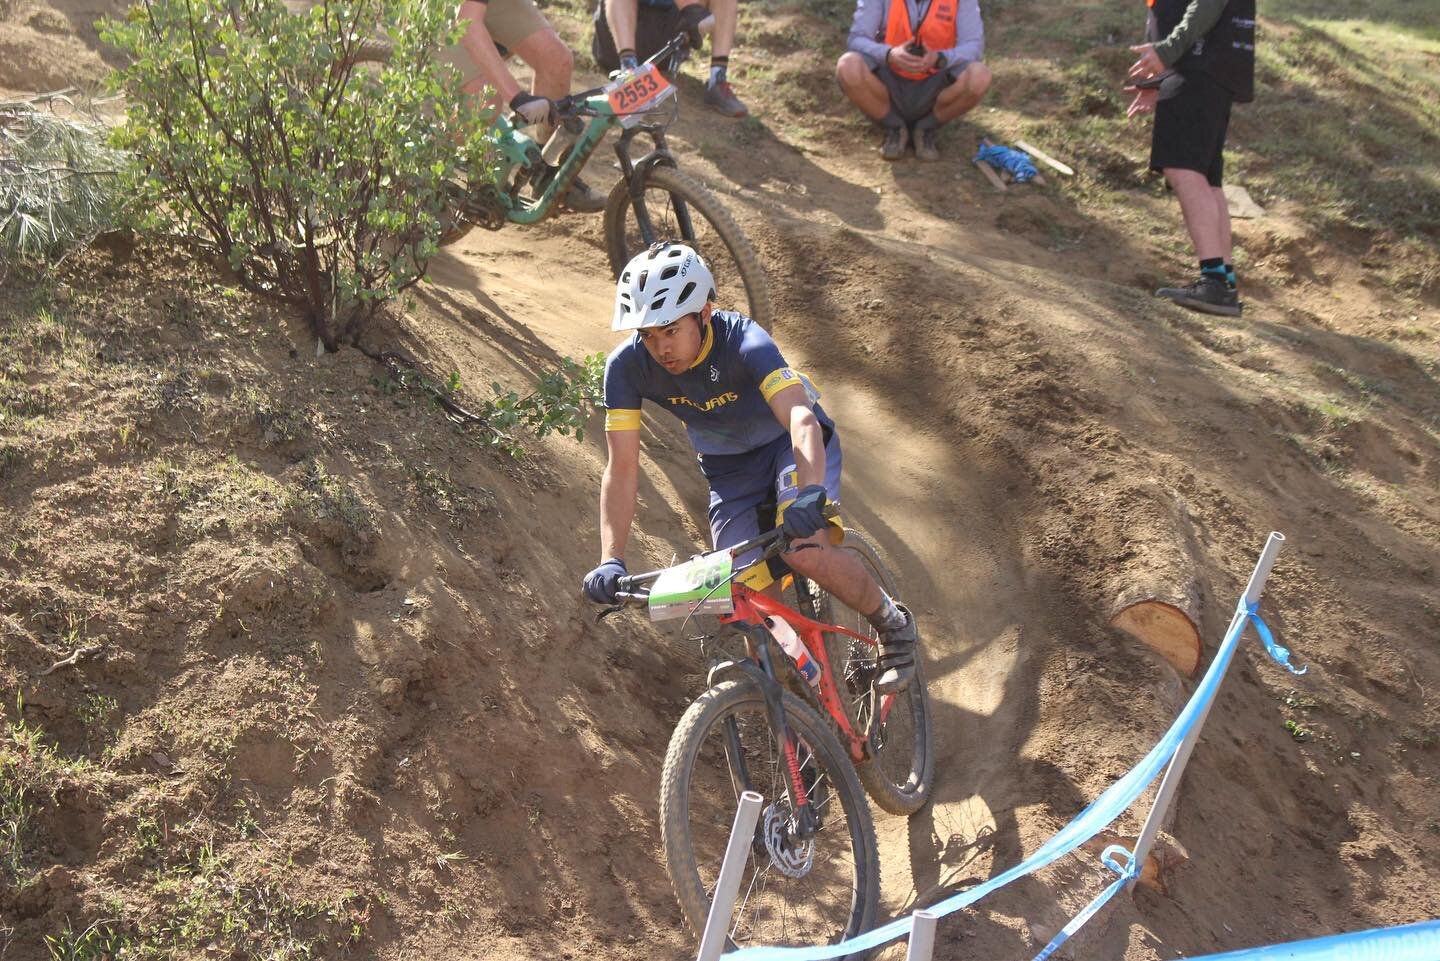 Athletes Ethan I, Colton, Garrison, Lief, Jeff, Ian, and Finn taking on one of Six Sigma&rsquo;s new berm features at last weekend&rsquo;s course

#morekidsonbikes #trojanpride80 #cyclingdev #oakridgemtb #norcalmtbleague